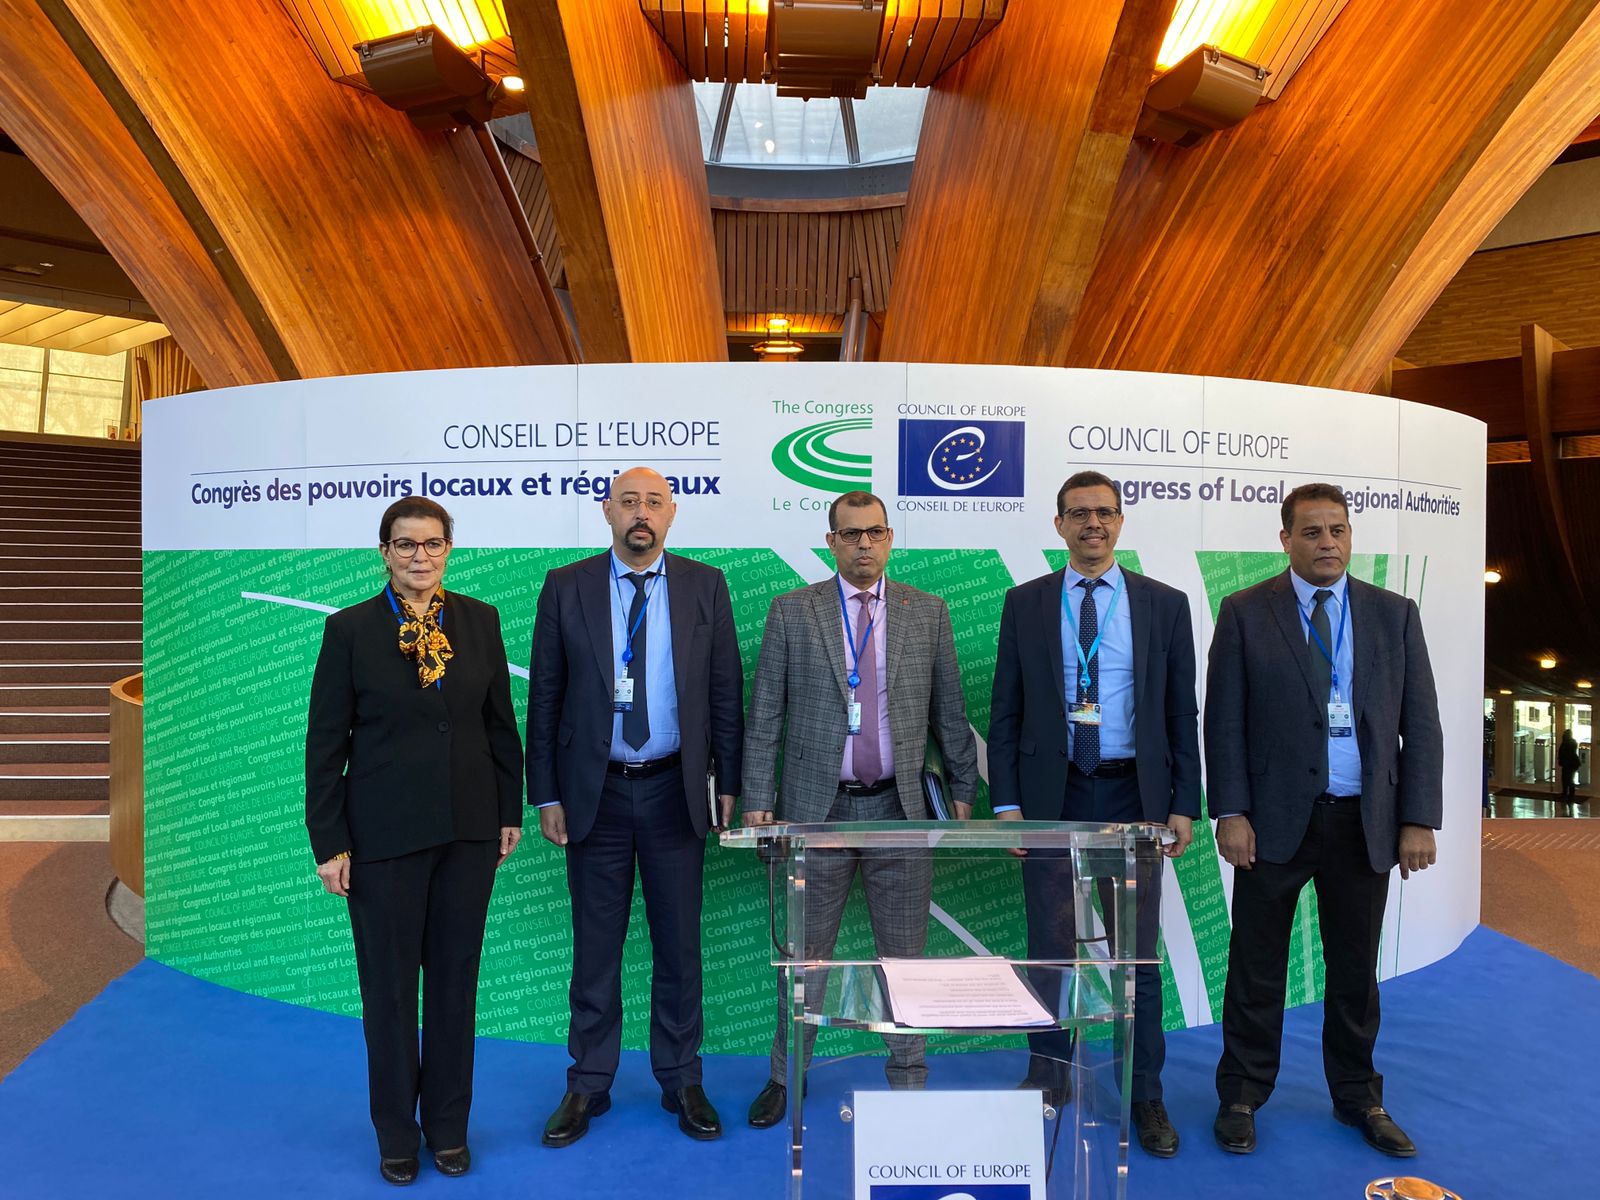 Press release on the participation of the Moroccan Association of the Presidents of the Councils of Prefectures and Provinces in work of the Congress of Local and Regional Authorities of the Council of Europe